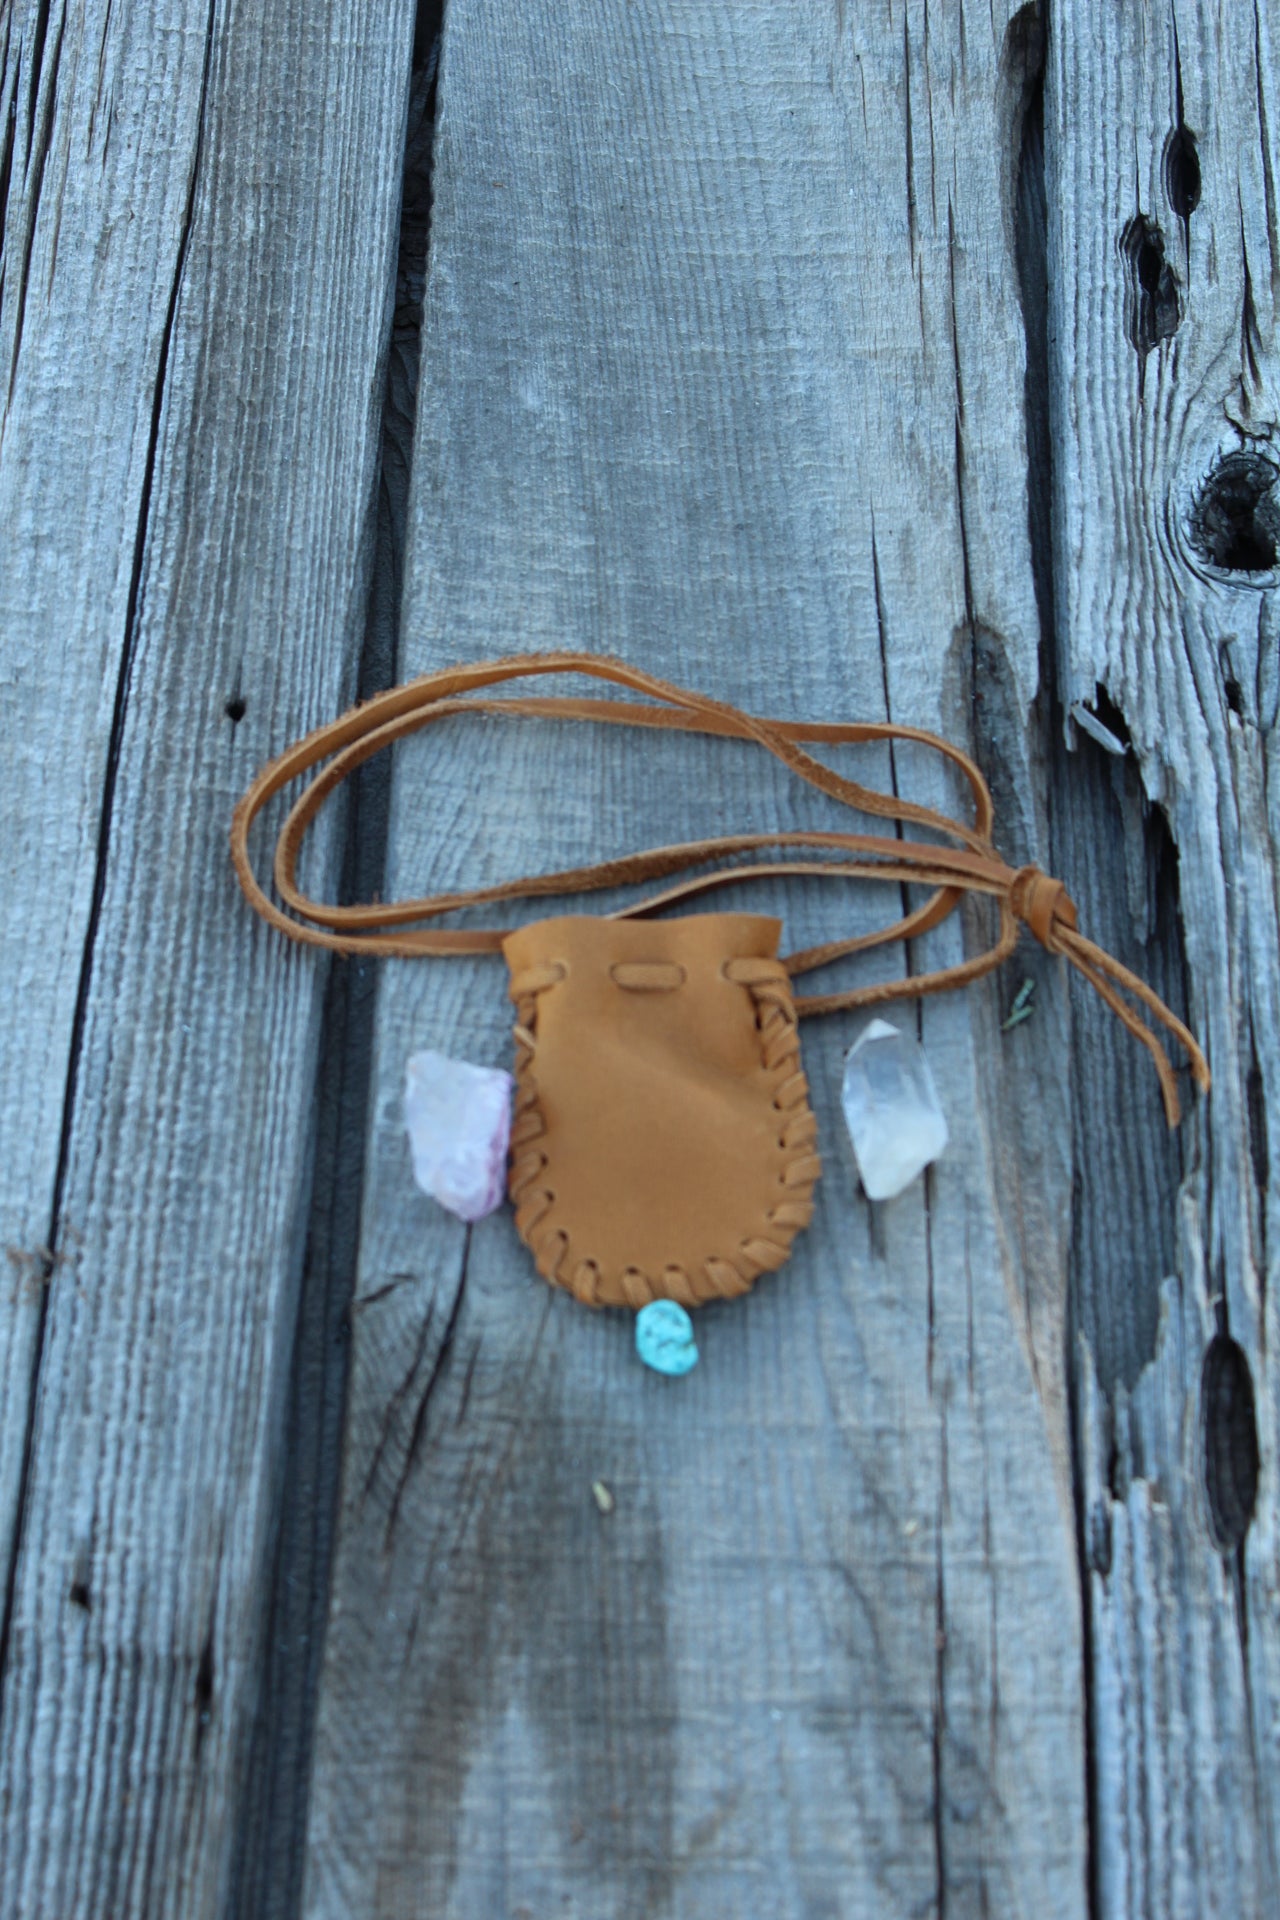 Small medicine bag, handmade leather pouch